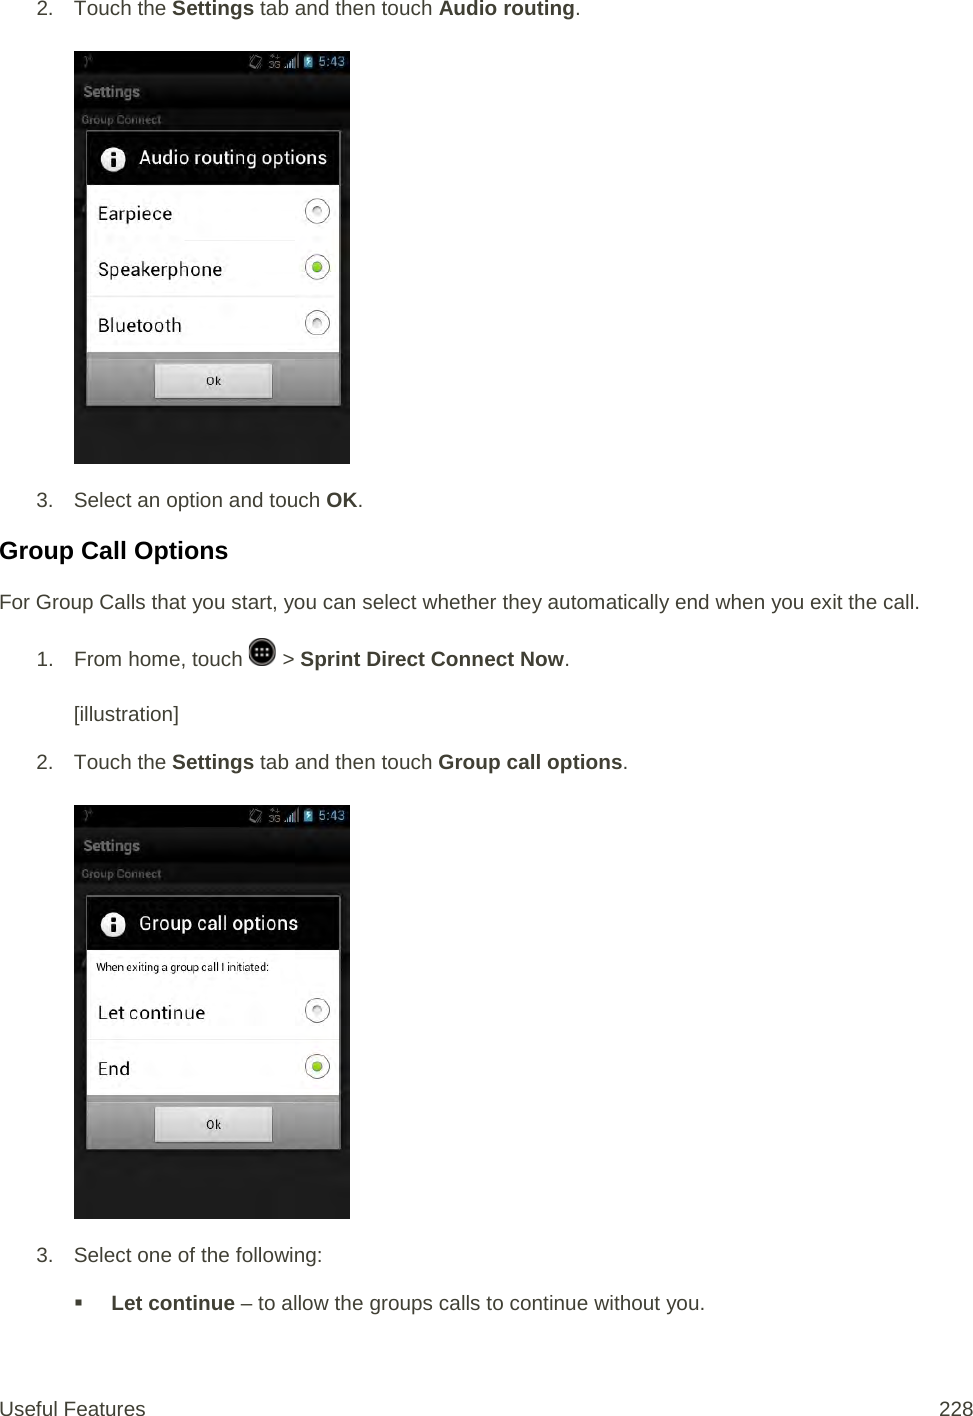 2. Touch the Settings tab and then touch Audio routing.   3. Select an option and touch OK.  Group Call Options For Group Calls that you start, you can select whether they automatically end when you exit the call. 1.  From home, touch   &gt; Sprint Direct Connect Now.   [illustration] 2. Touch the Settings tab and then touch Group call options.   3. Select one of the following:  Let continue – to allow the groups calls to continue without you. Useful Features 228   